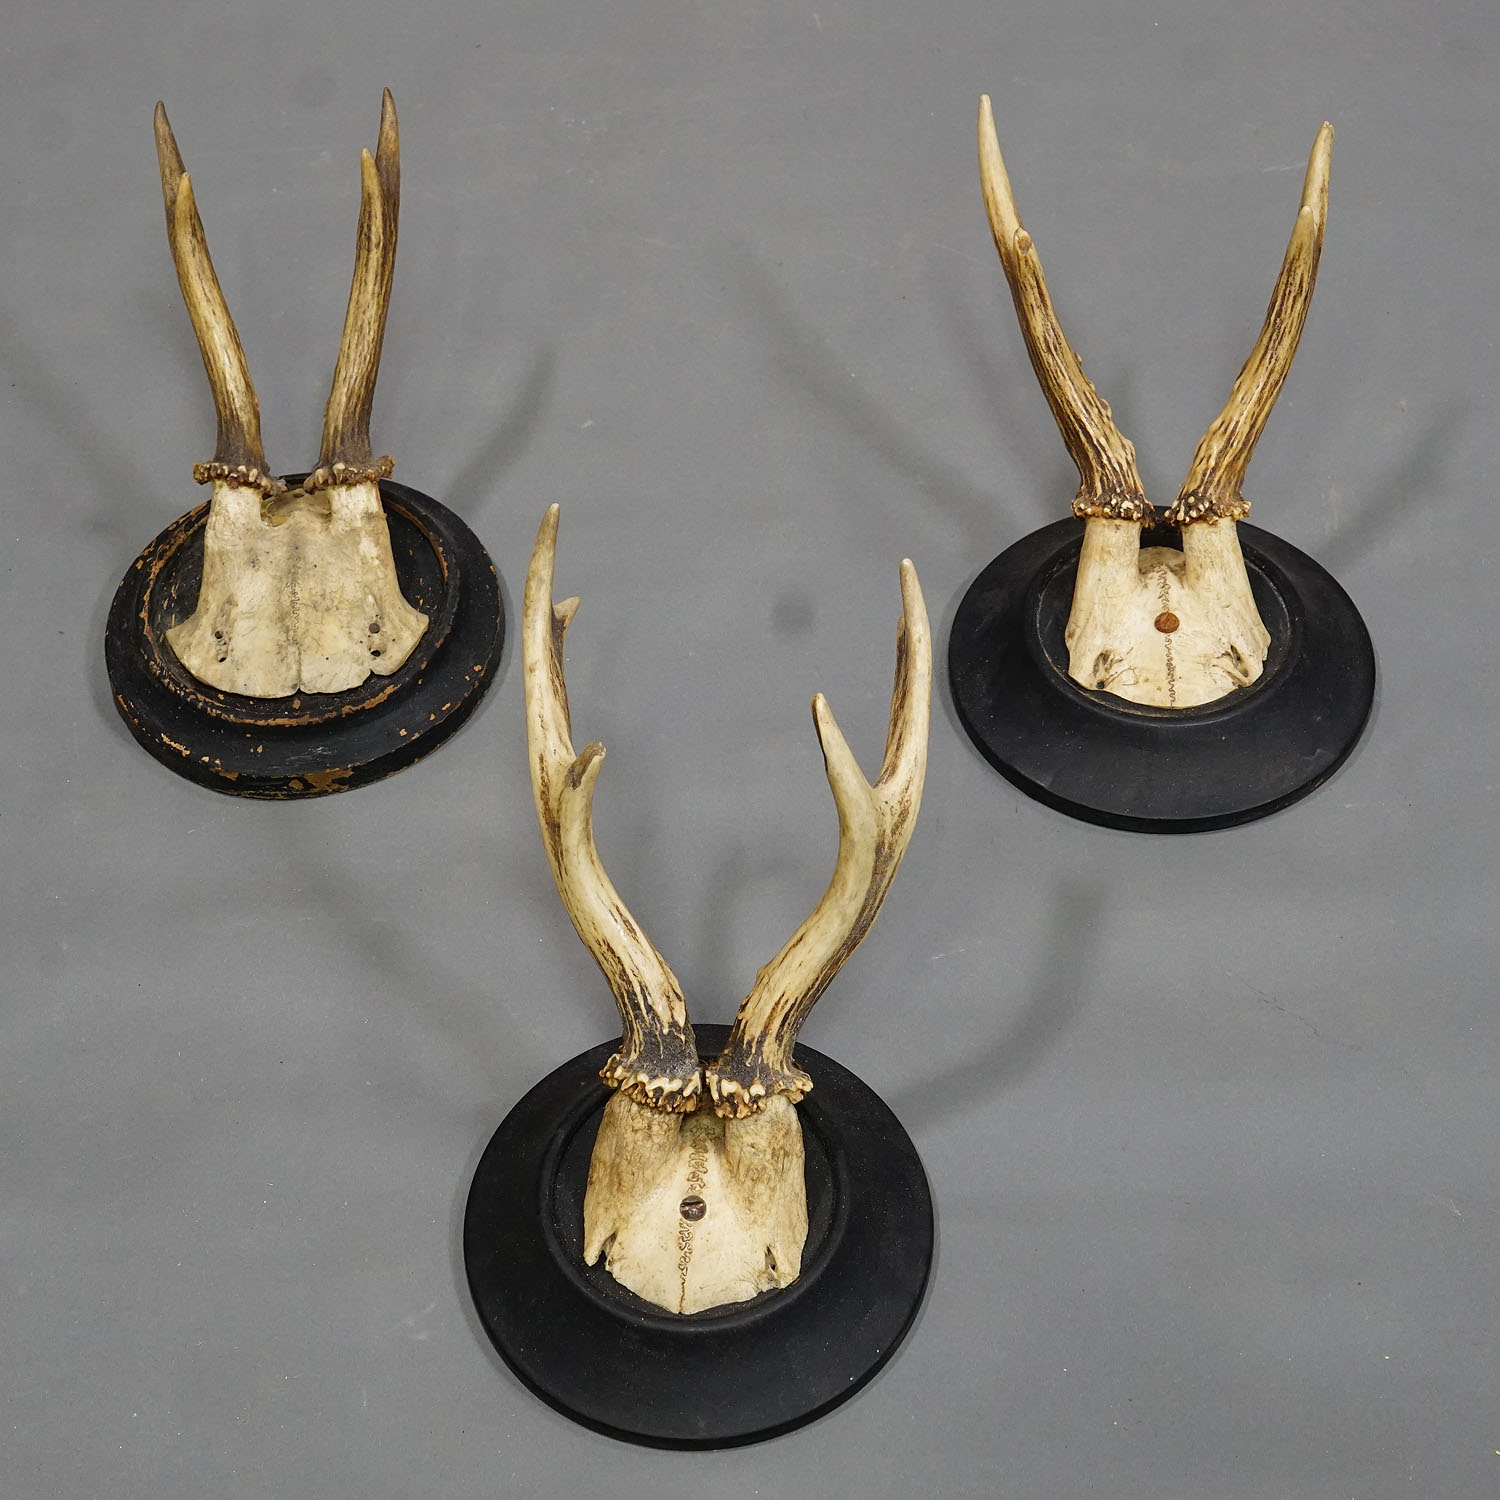 Six Antique Deer Trophies on Wooden Plaques Germany ca. 1930s